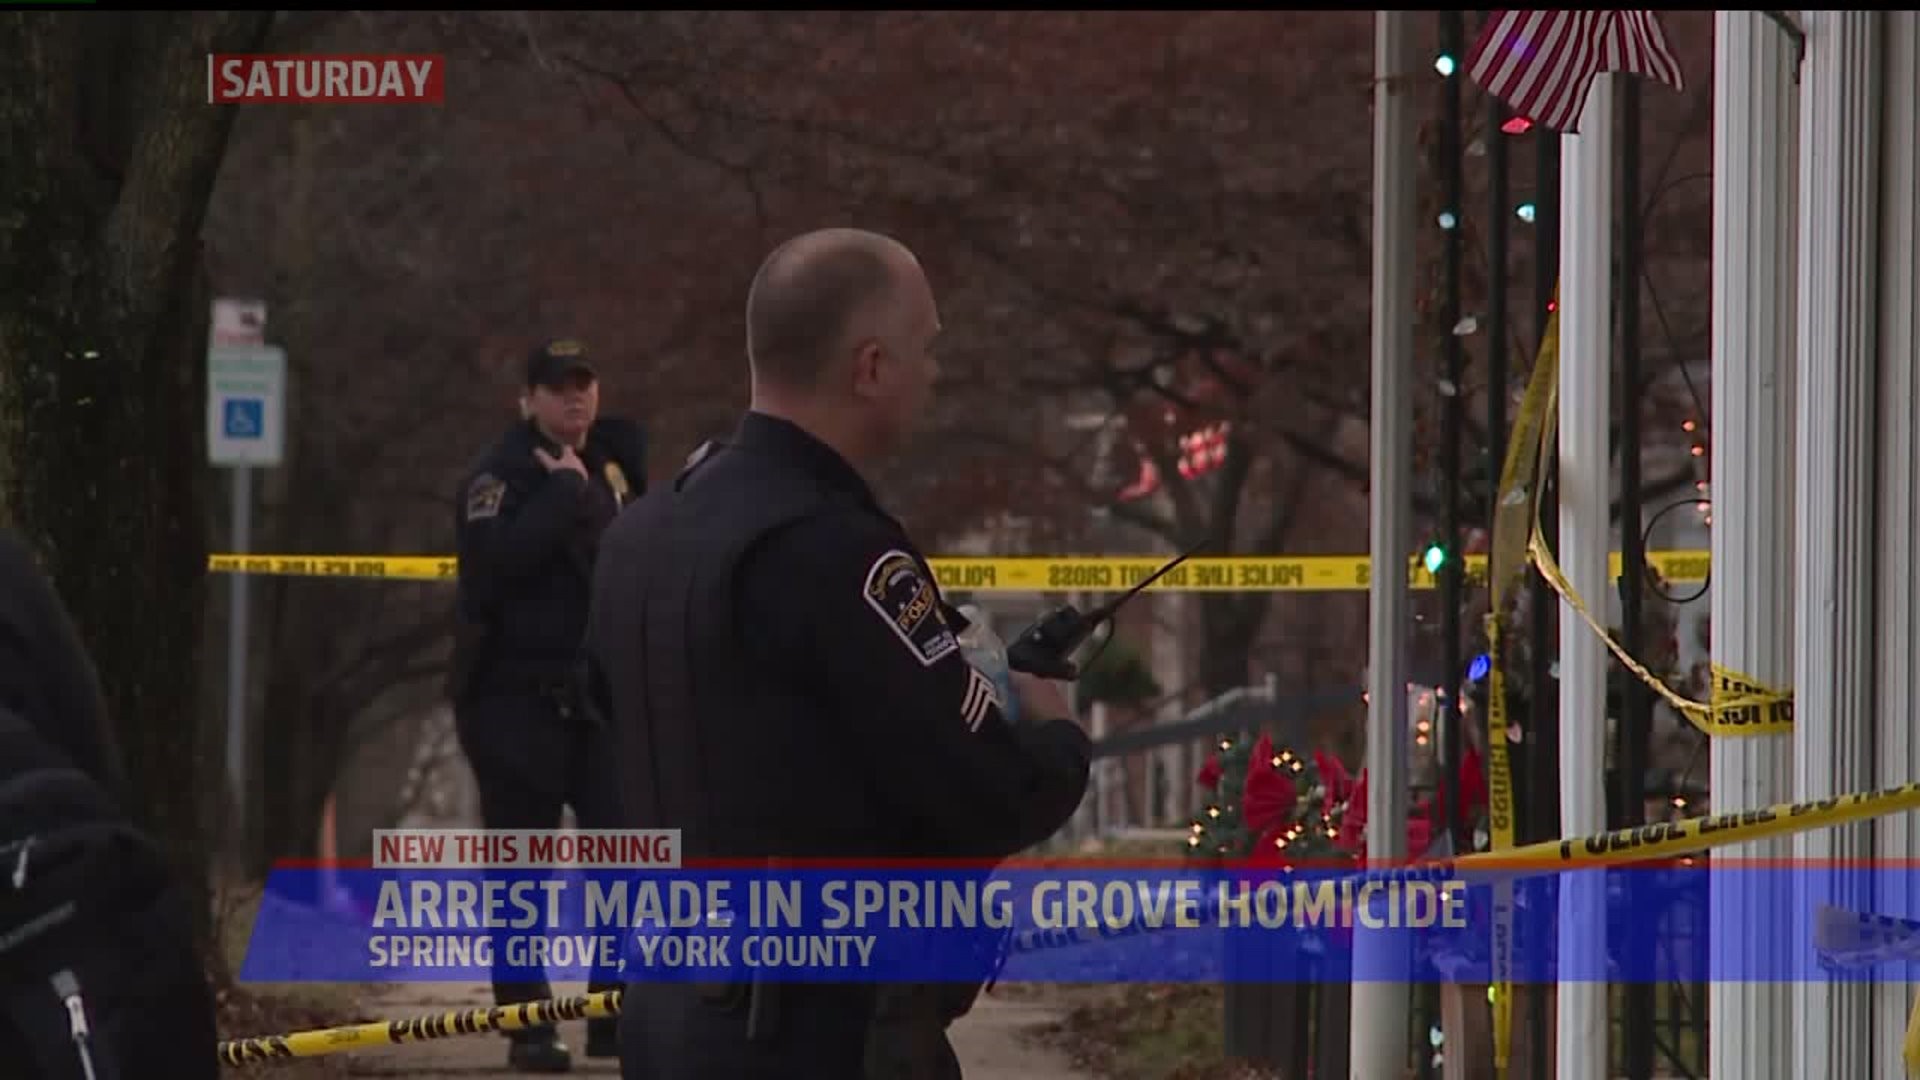 Man arrested for homicide and burglary in Spring Grove